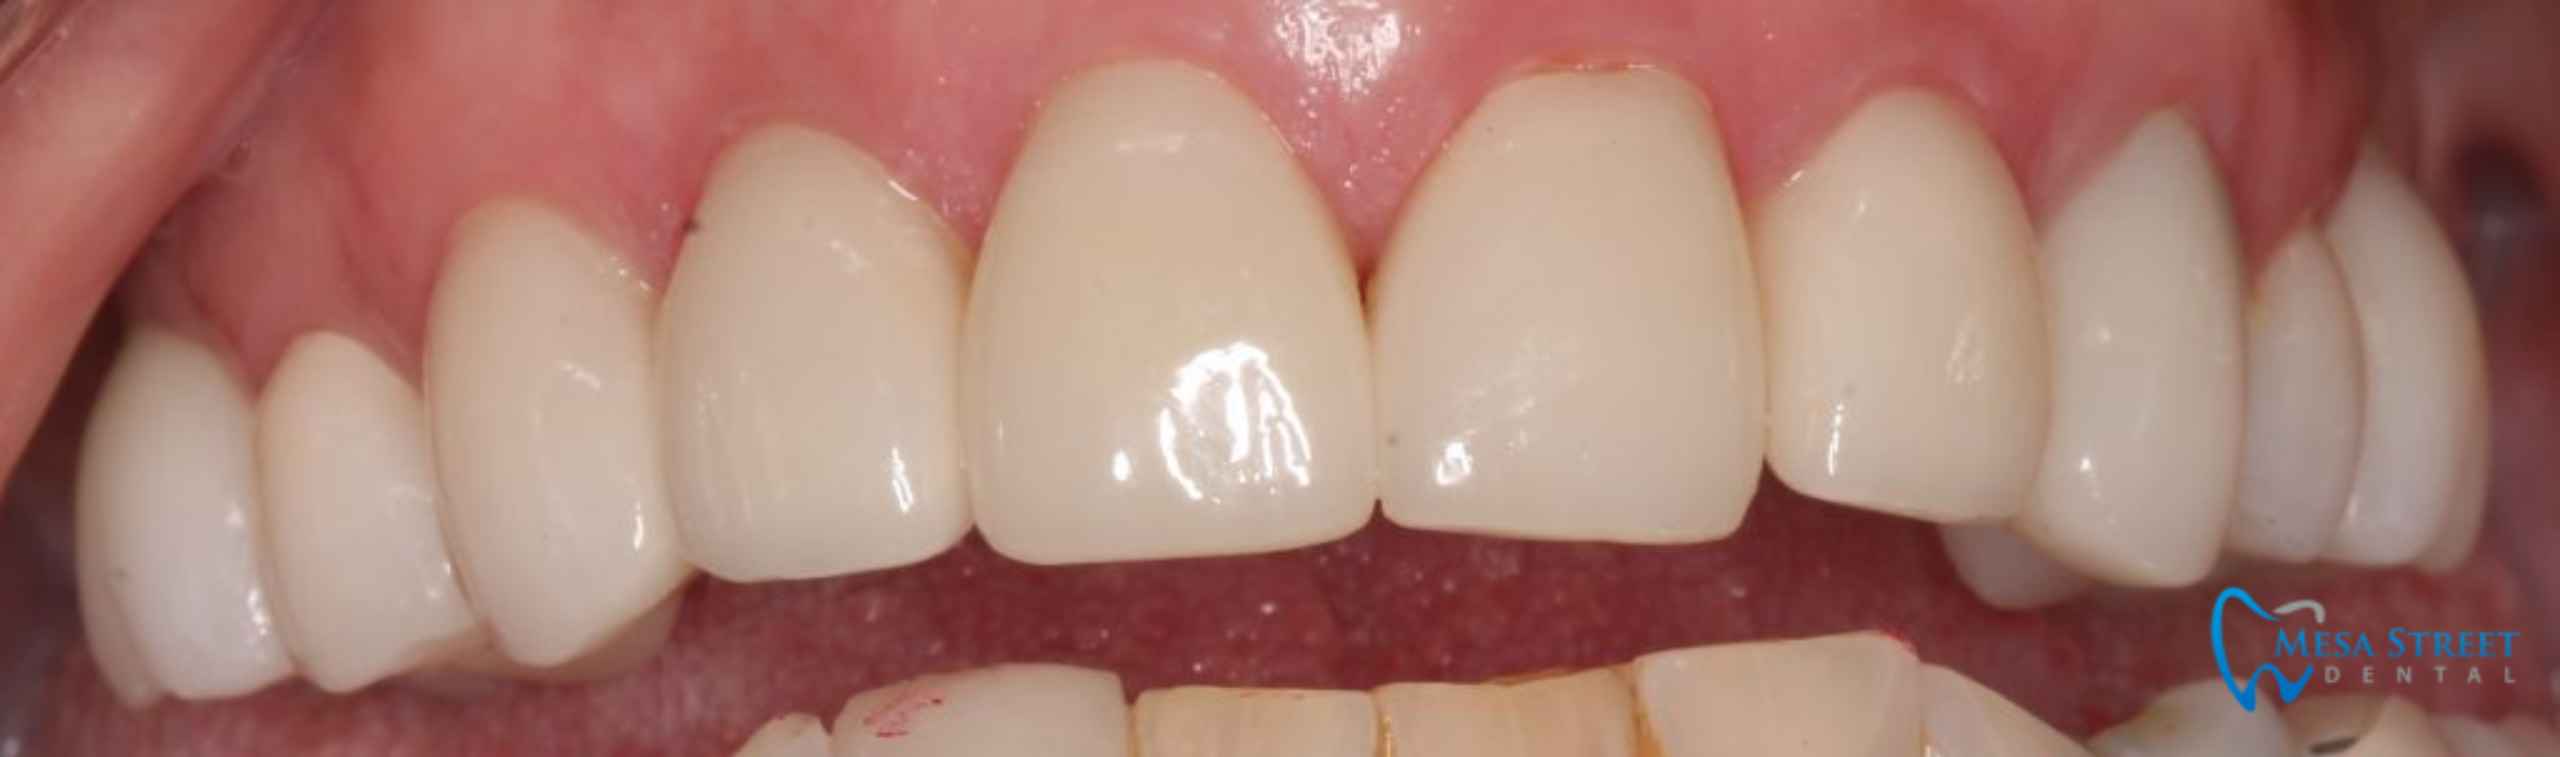 Crowns and Implants Correcting Damaged Teeth